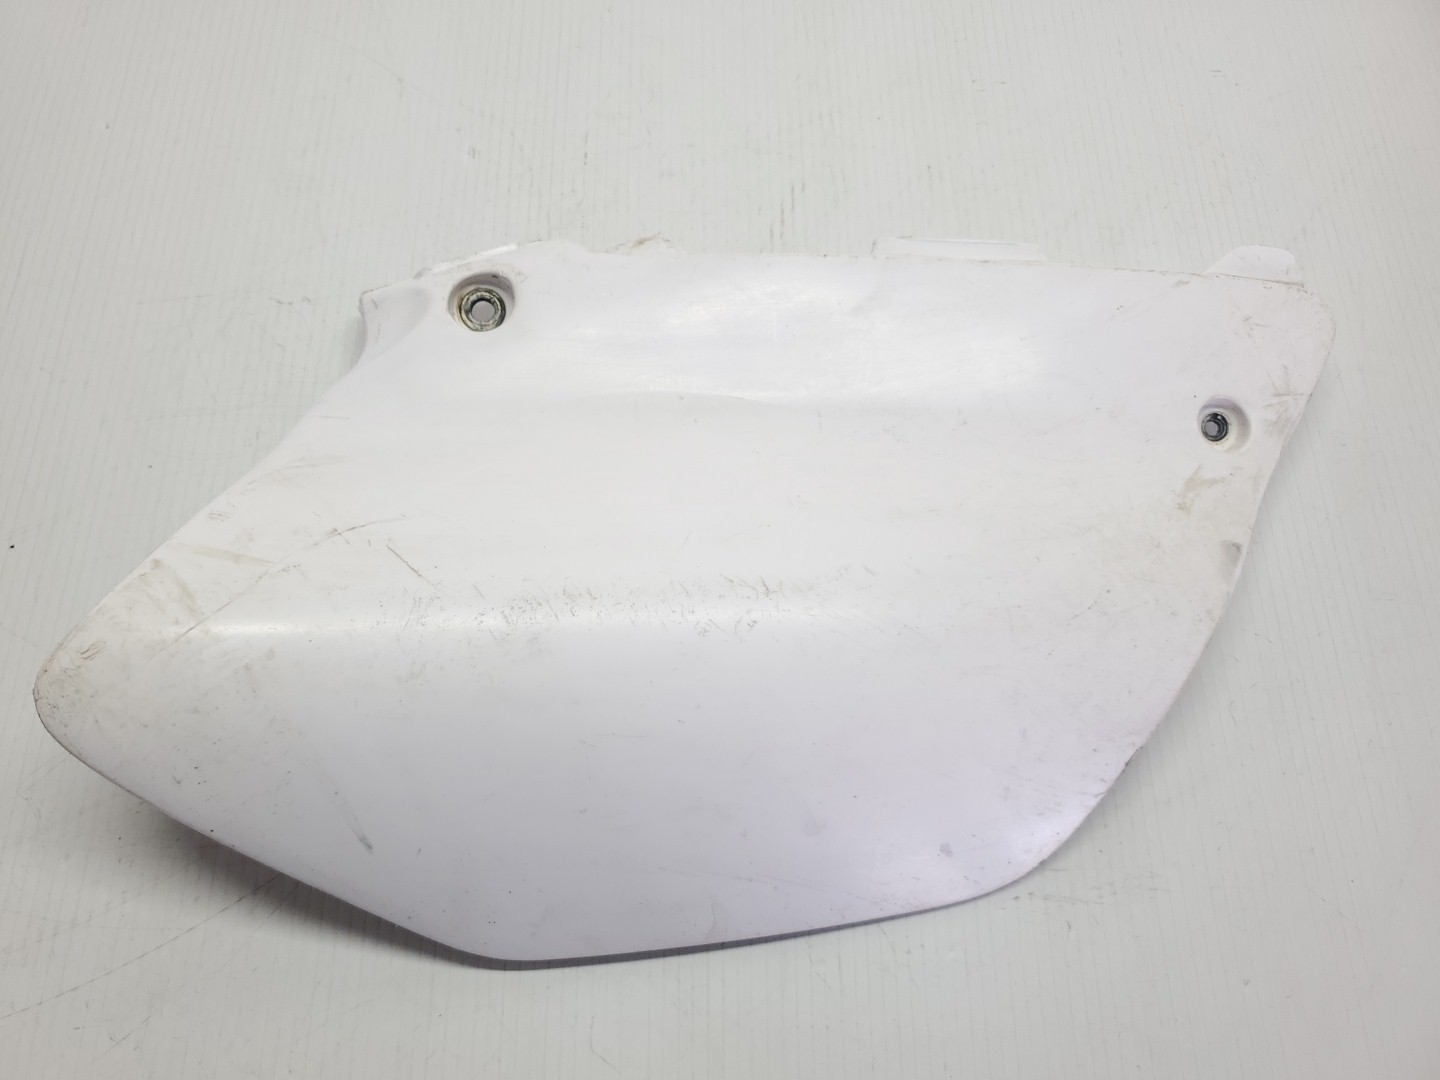 Yamaha YZ250 Right Side Cover YZ 250 06-14 #851